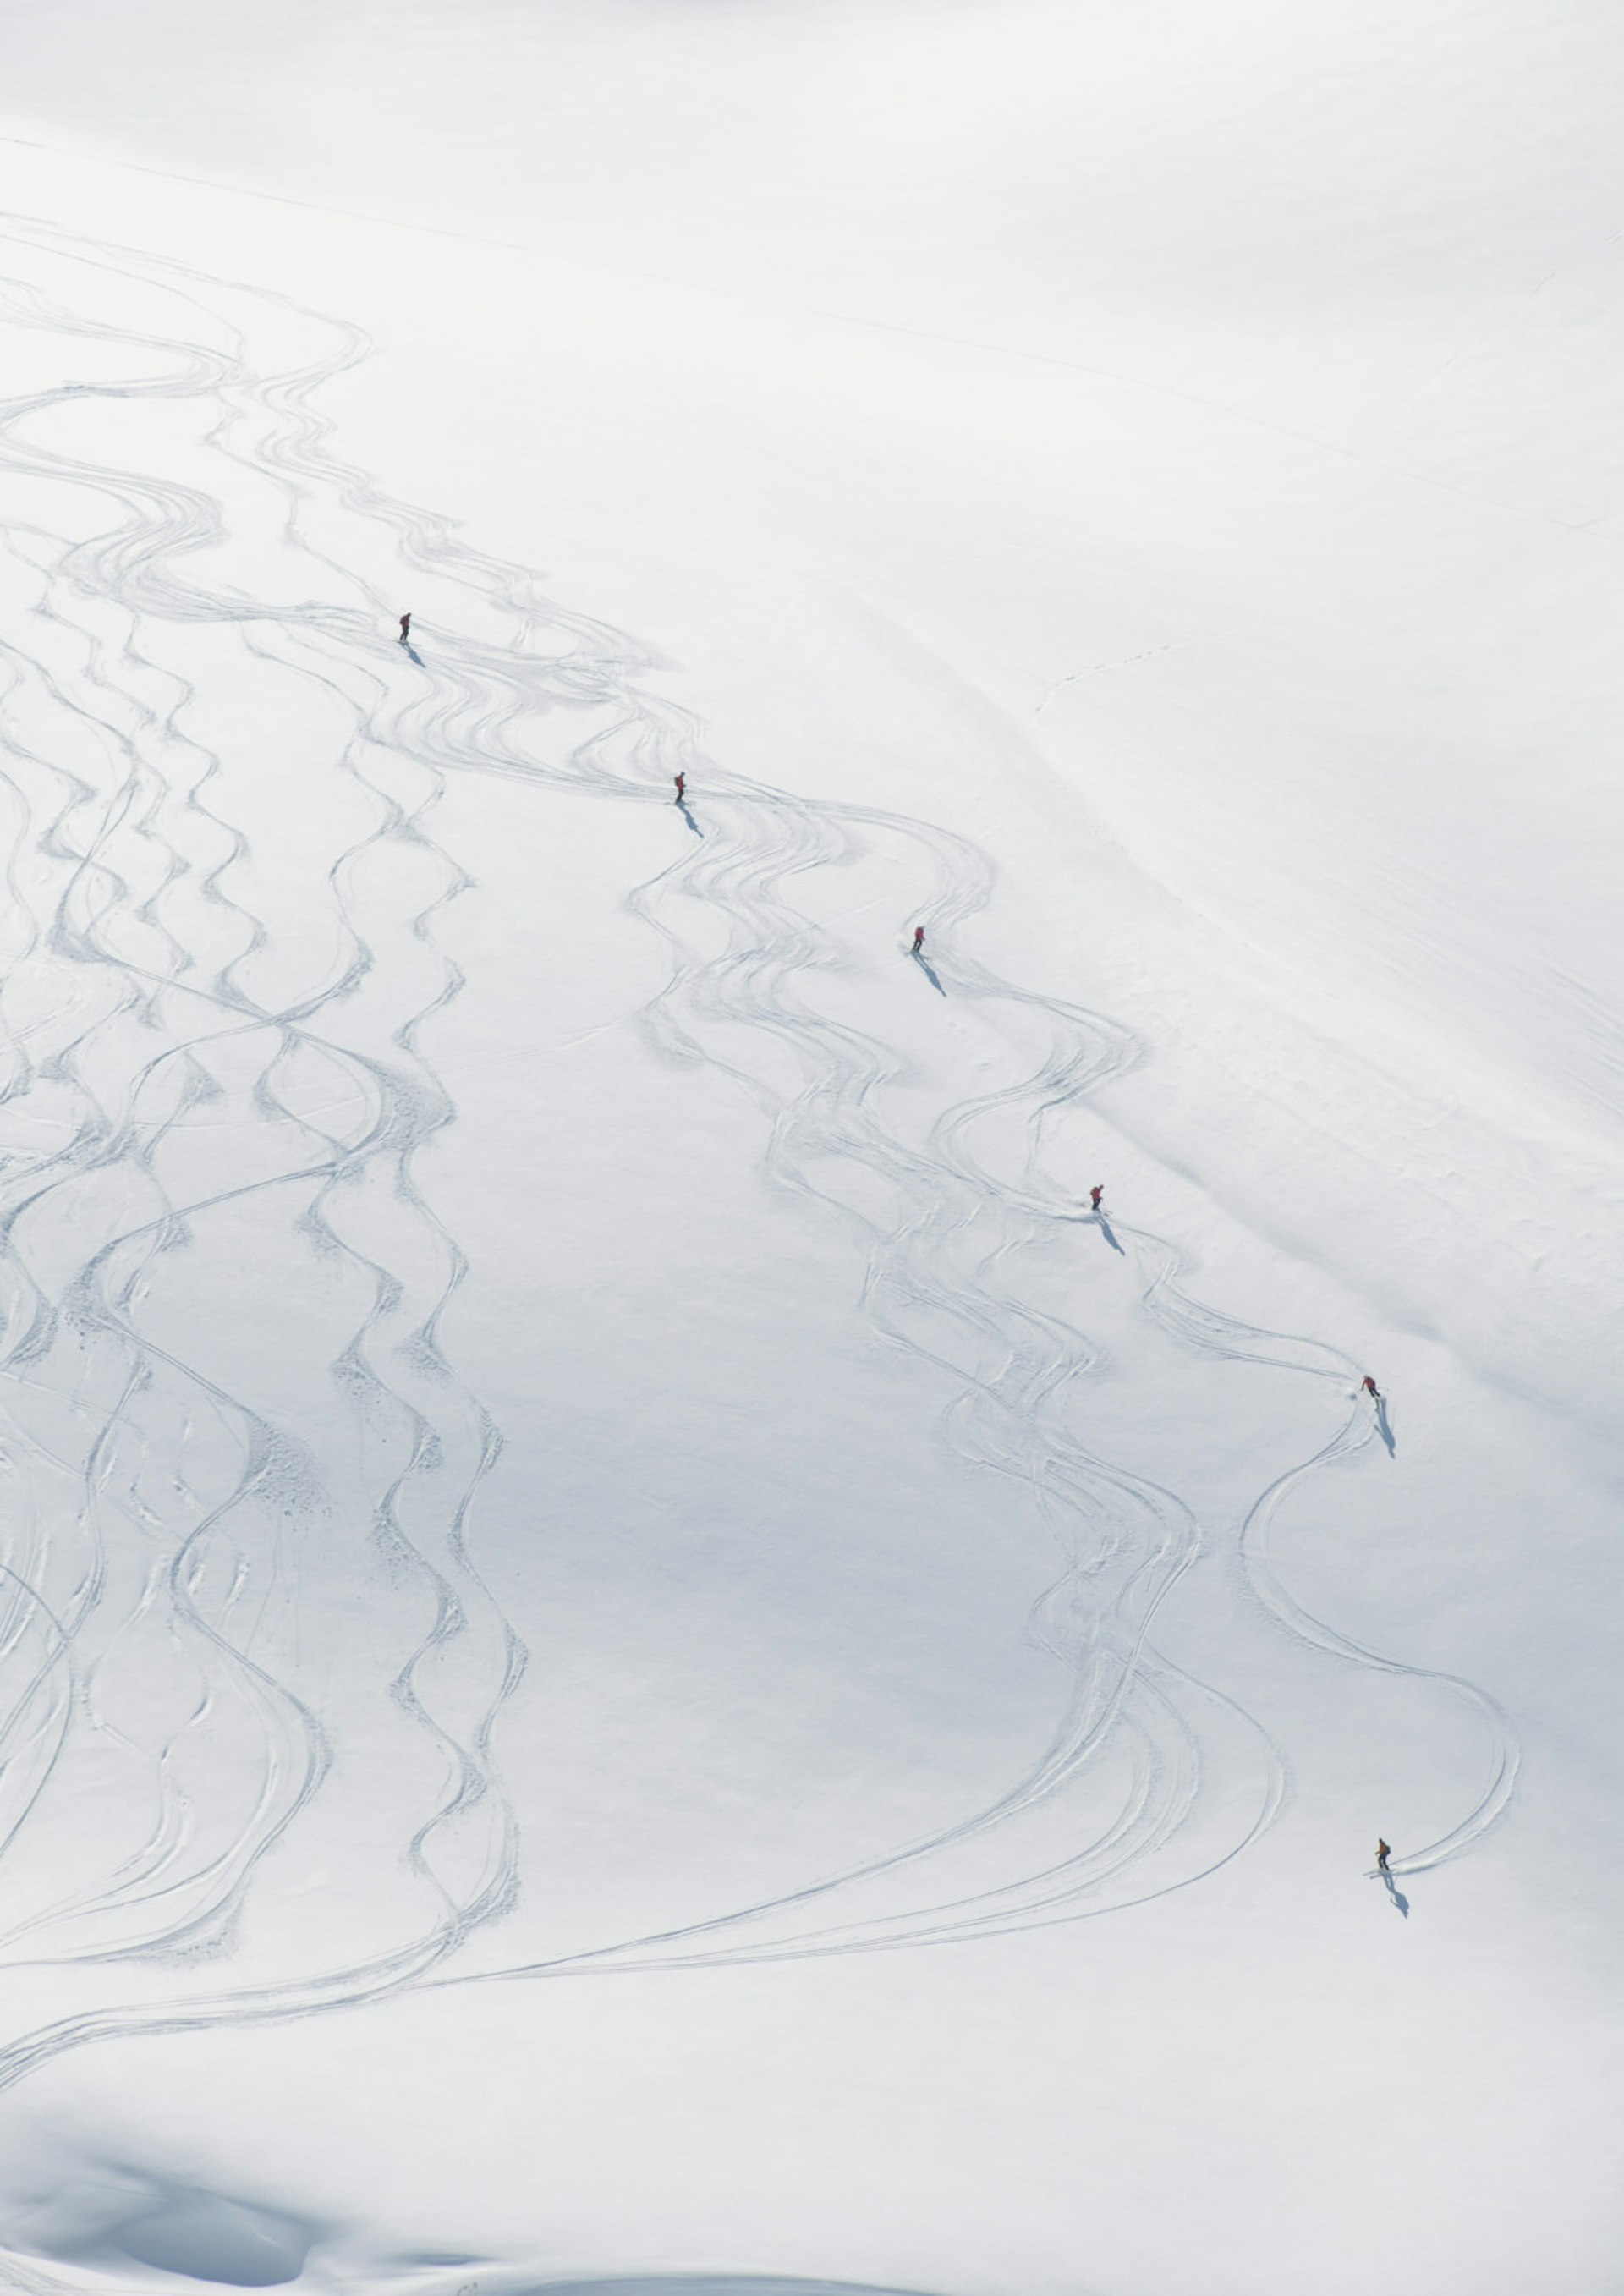 Skiers cut runs down a snowy mountain in Val-d'Isère, France © James D. Morgan/Getty Images